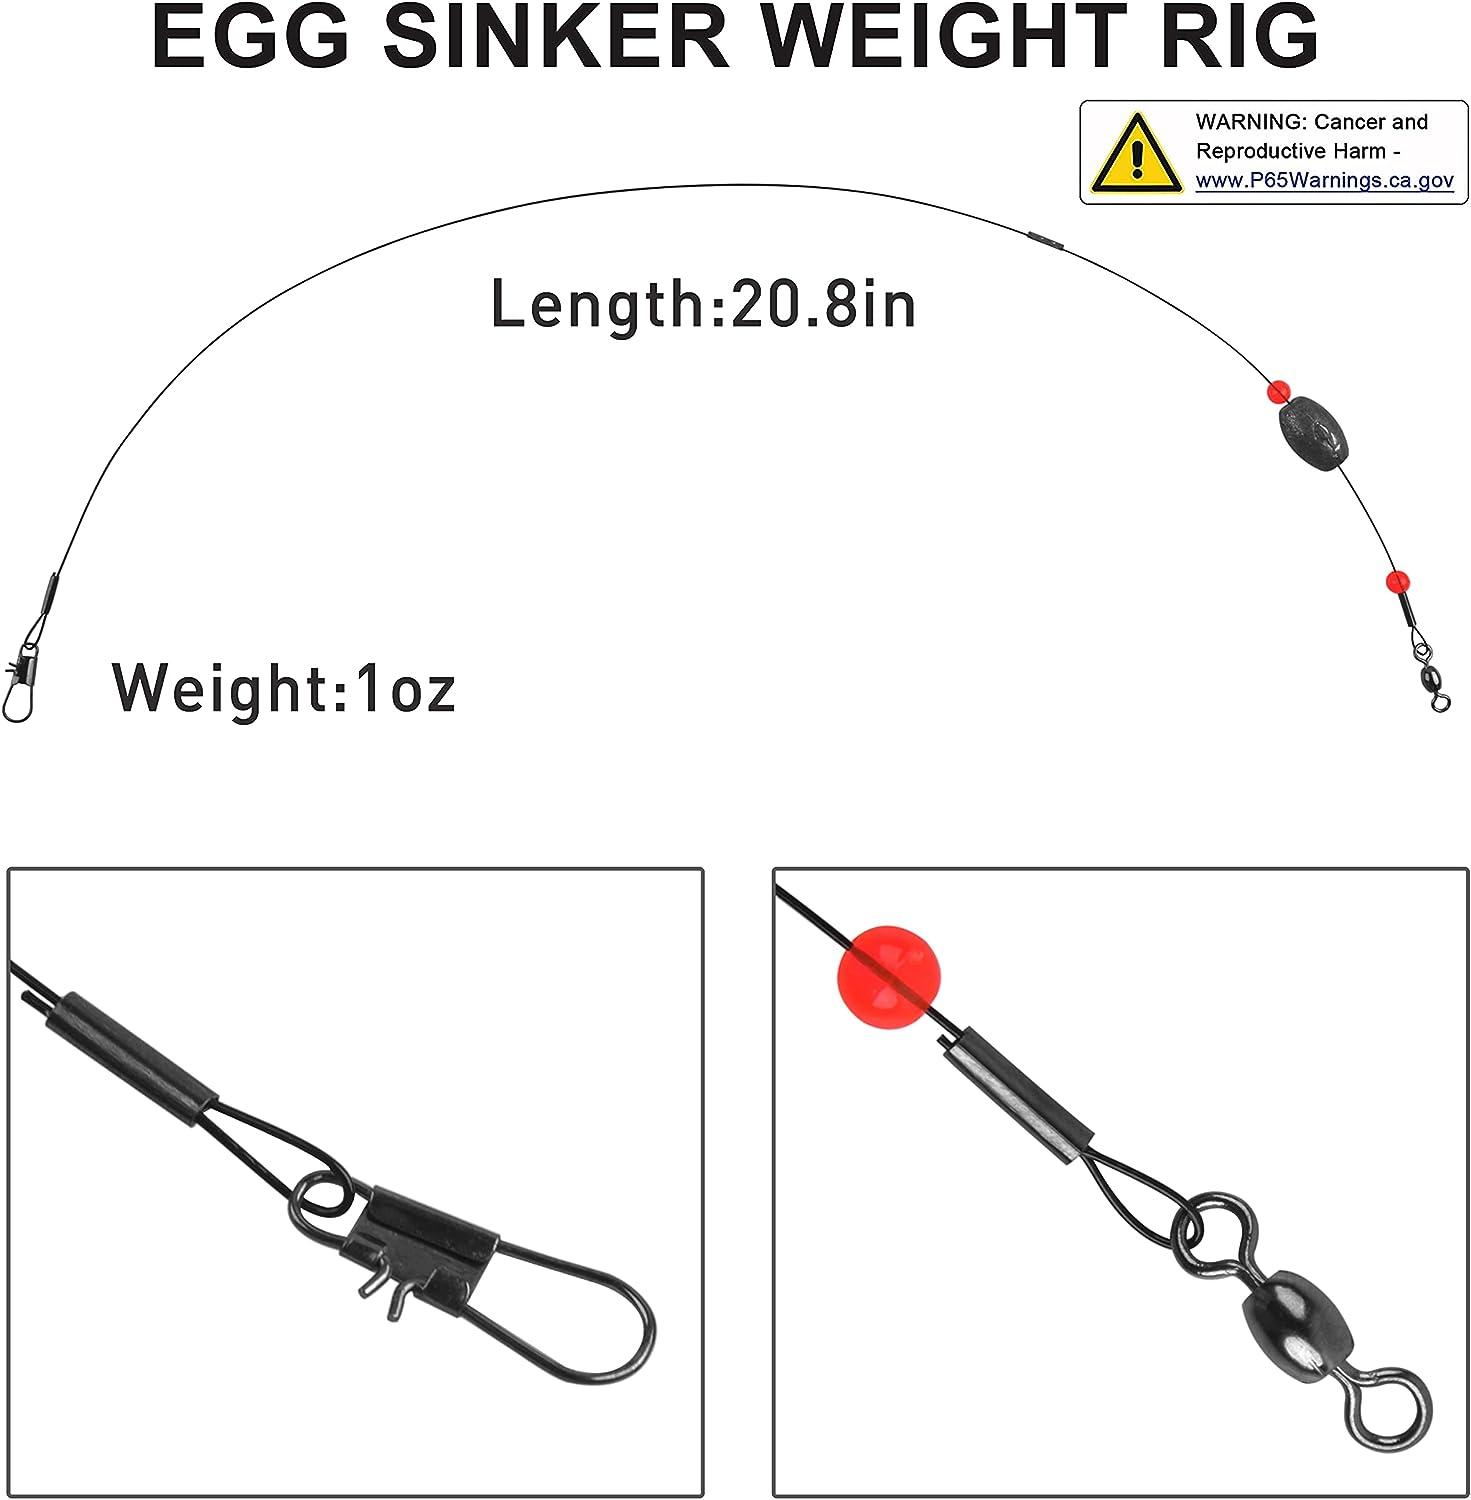 SILANON Fishing Egg Sinkers Weight Rigs,Flounder Grouper Ready Rig  Saltwater Stainless Steel Fishing Wire Leader with Egg Sinker Fishing  Swivel Snap Connector for Trout Snapper Bottom Fish 0.5oz-4pcs